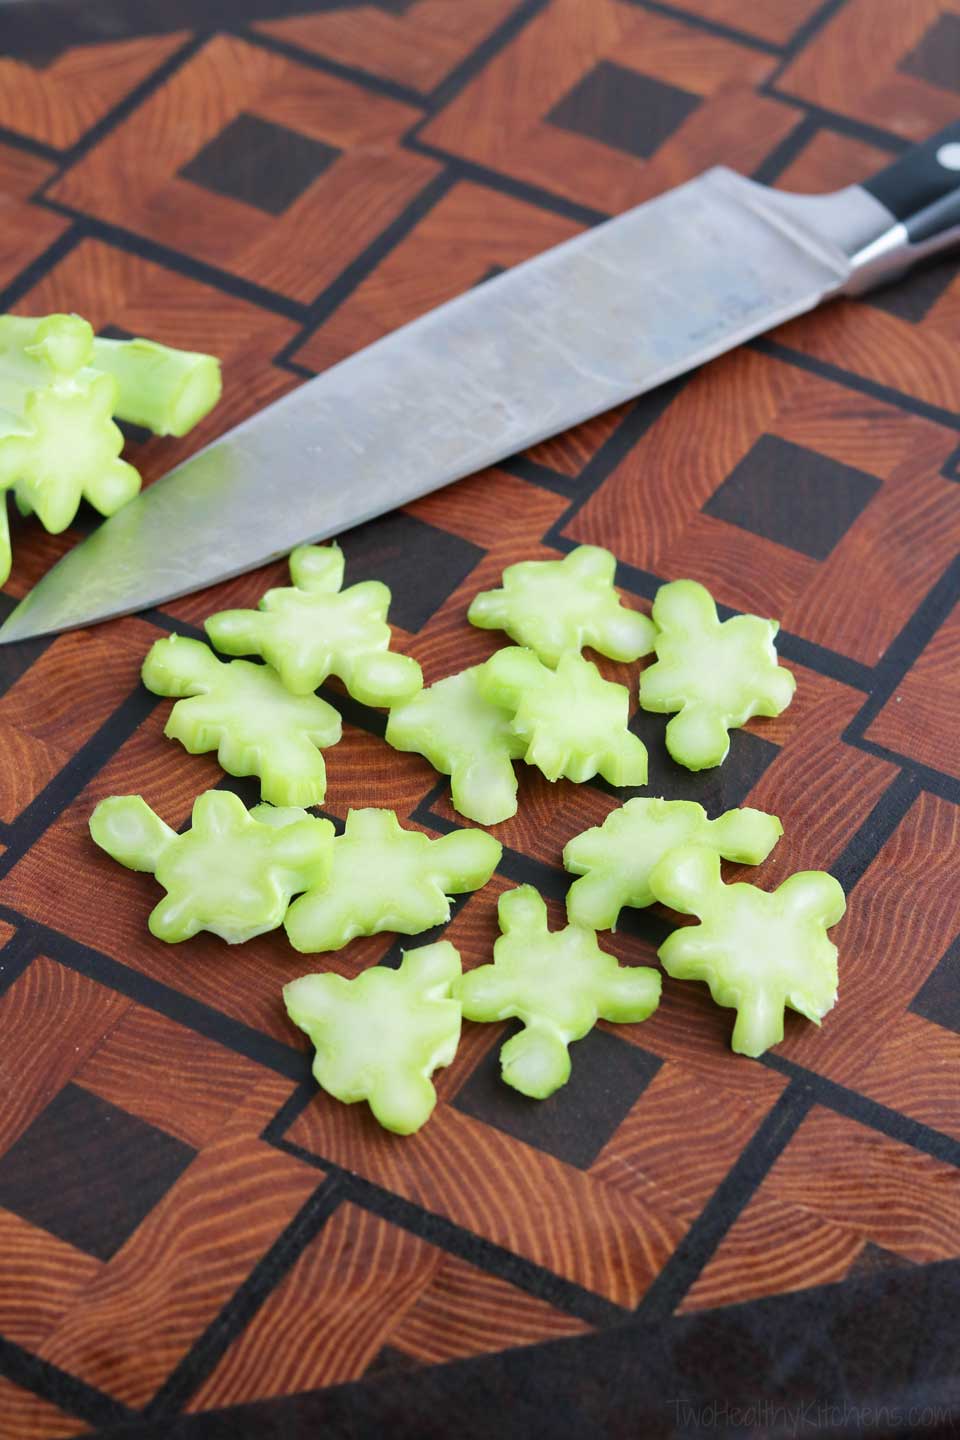 How to get kids to eat more vegetables: make fun shapes! This oven roasted broccoli suddenly becomes an eating adventure!